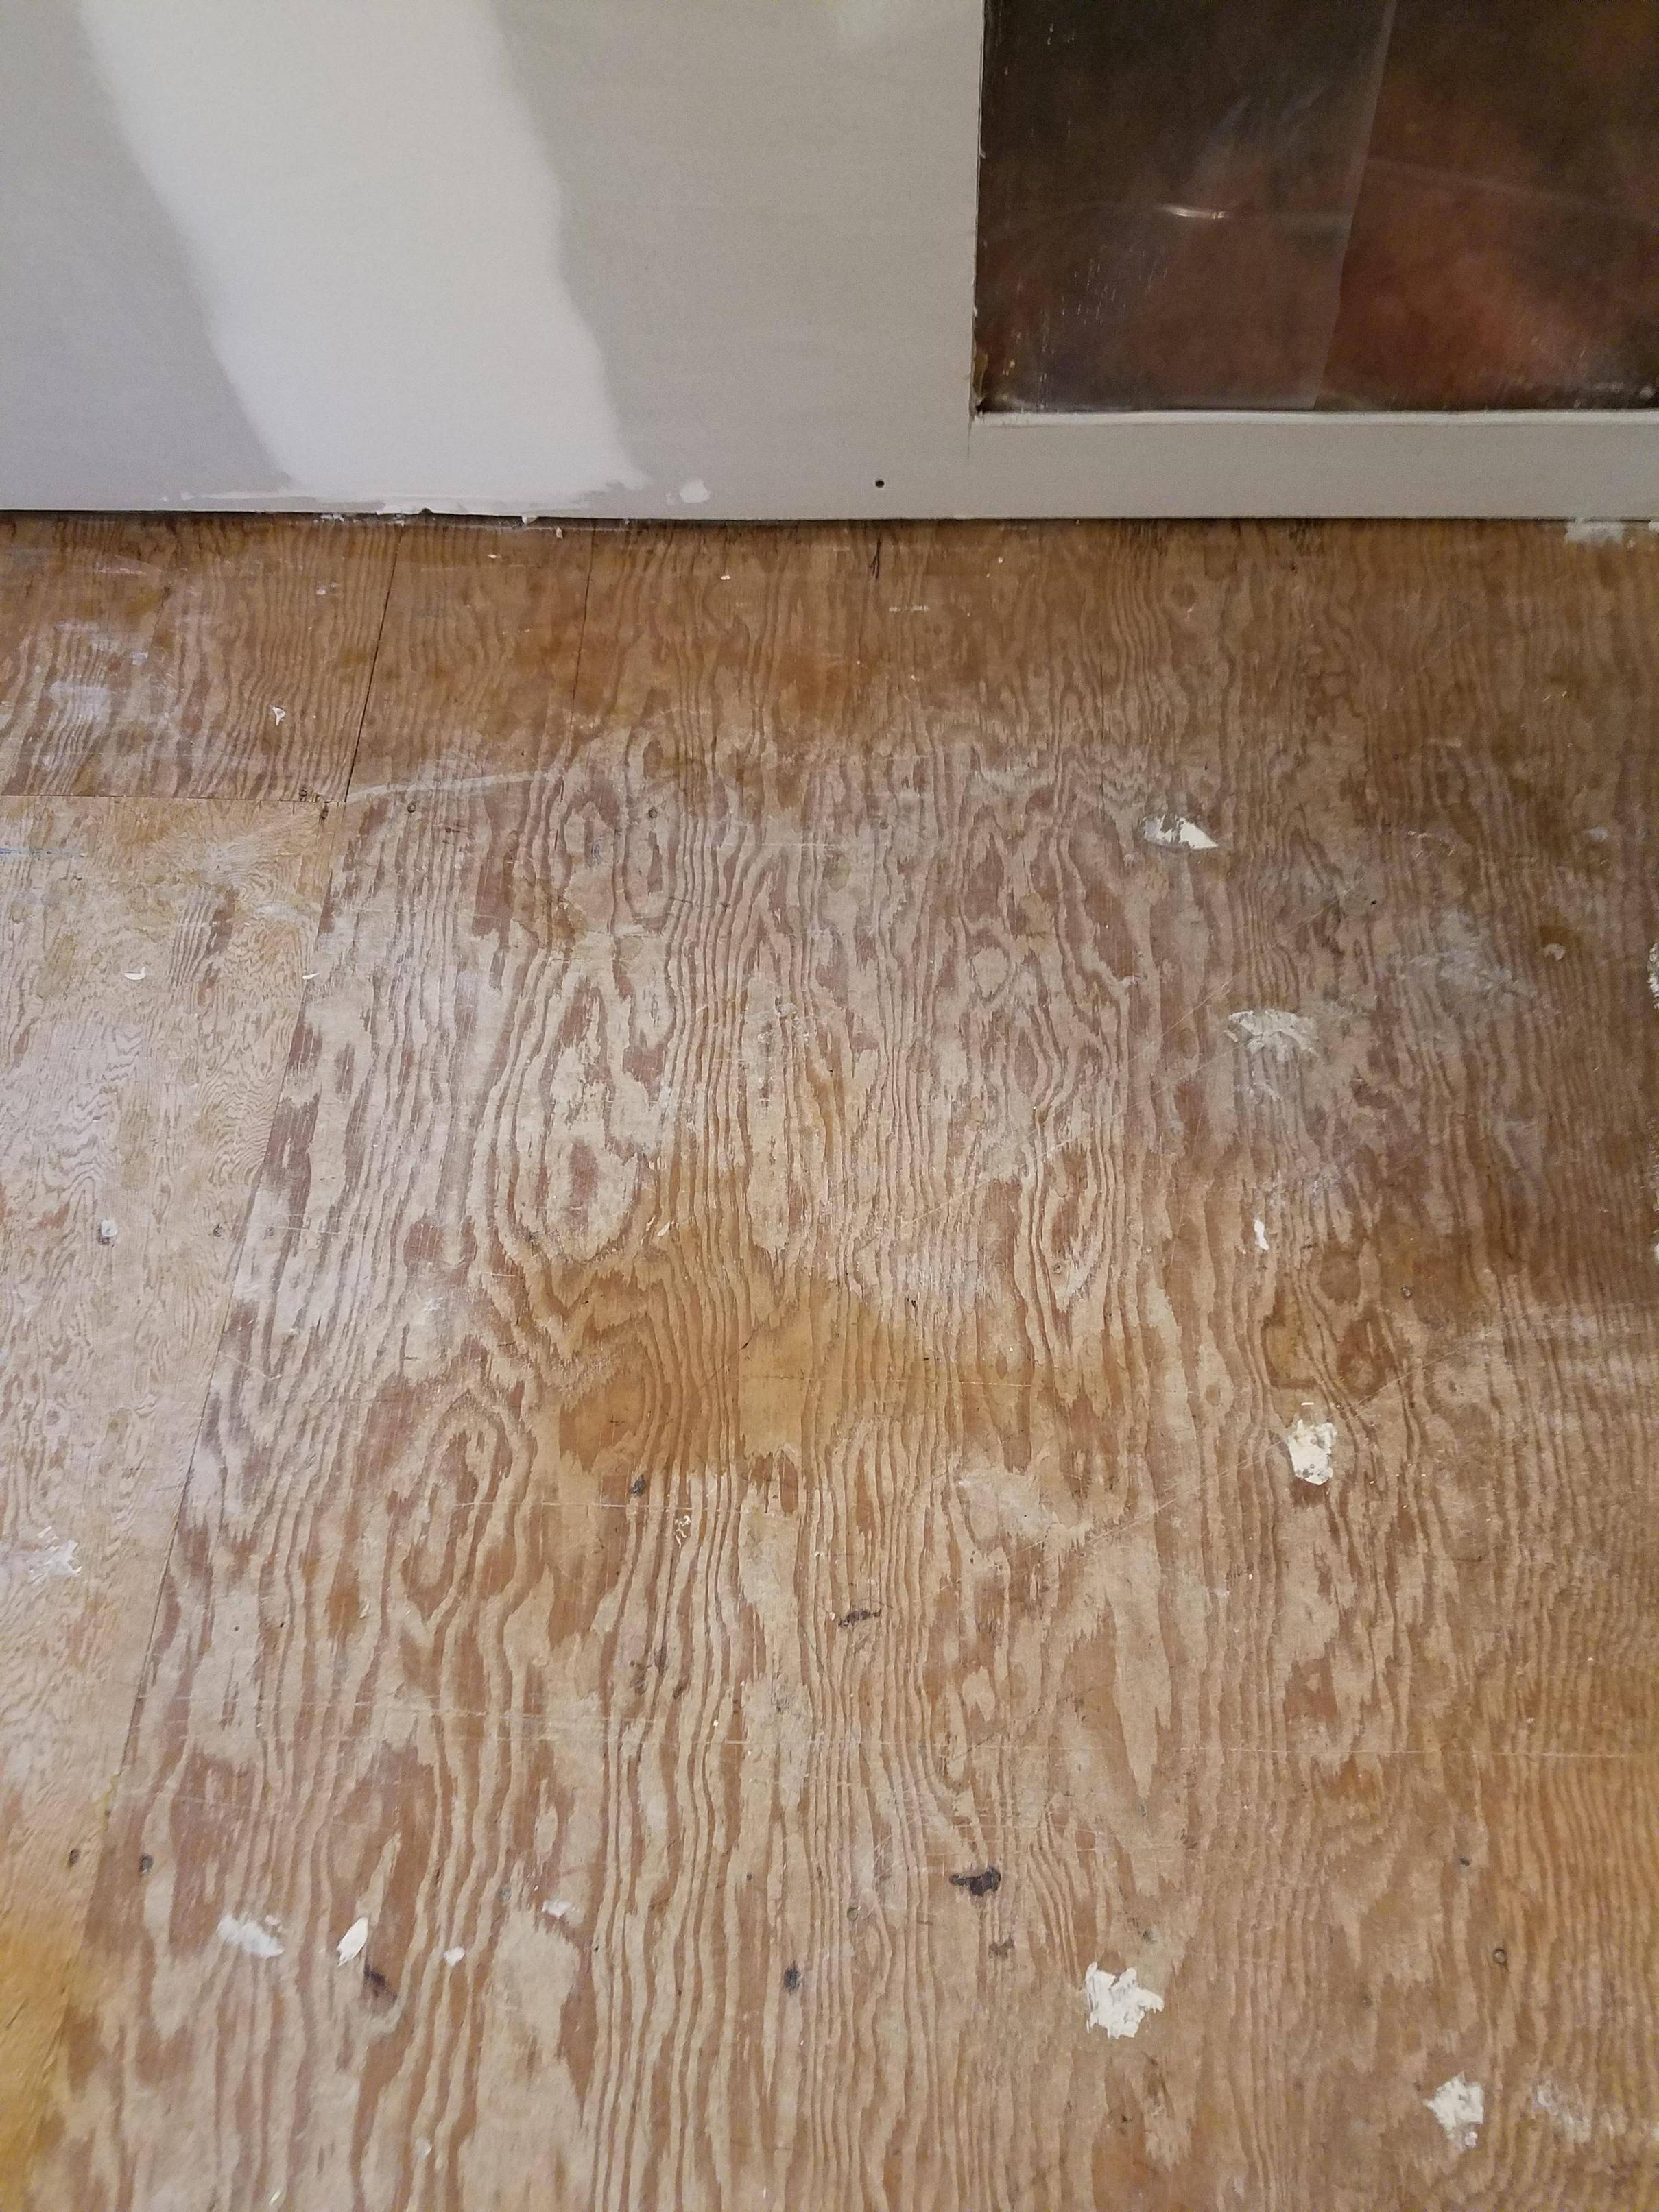 How to Clean Plywood Floors?